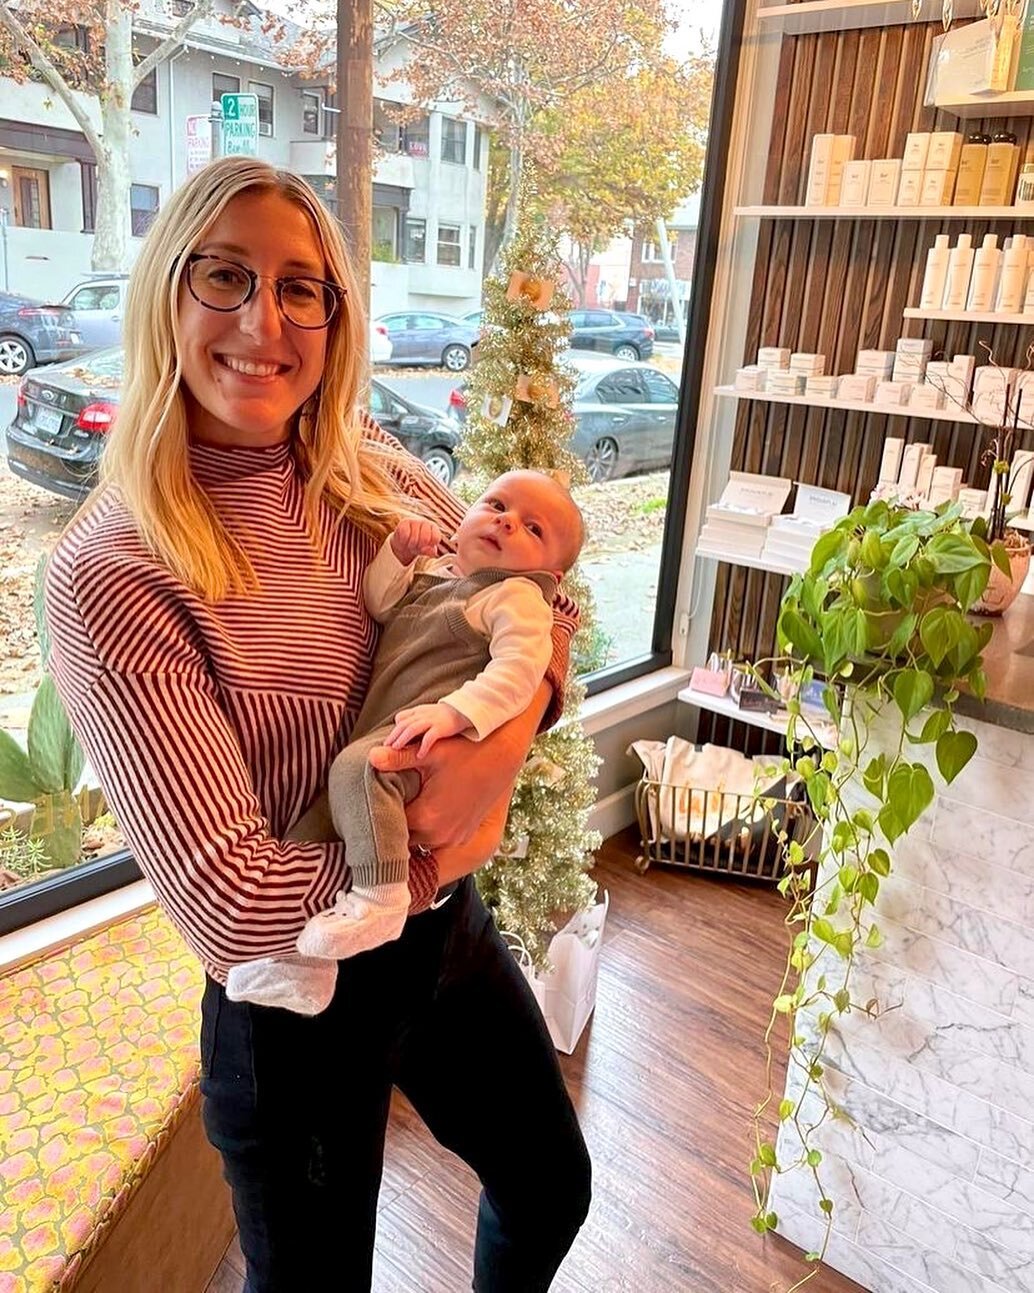 I&rsquo;ve never been happier for a baby to poop on my hand. 💩🤗

Love meeting your little acu babies. Keep &lsquo;em comin! 

.

.
#acupuncture #acupunctureforfertility #fertility #fertilityjourney #ivfjourney #pcos #pcospregnancy #pcossupport #chi